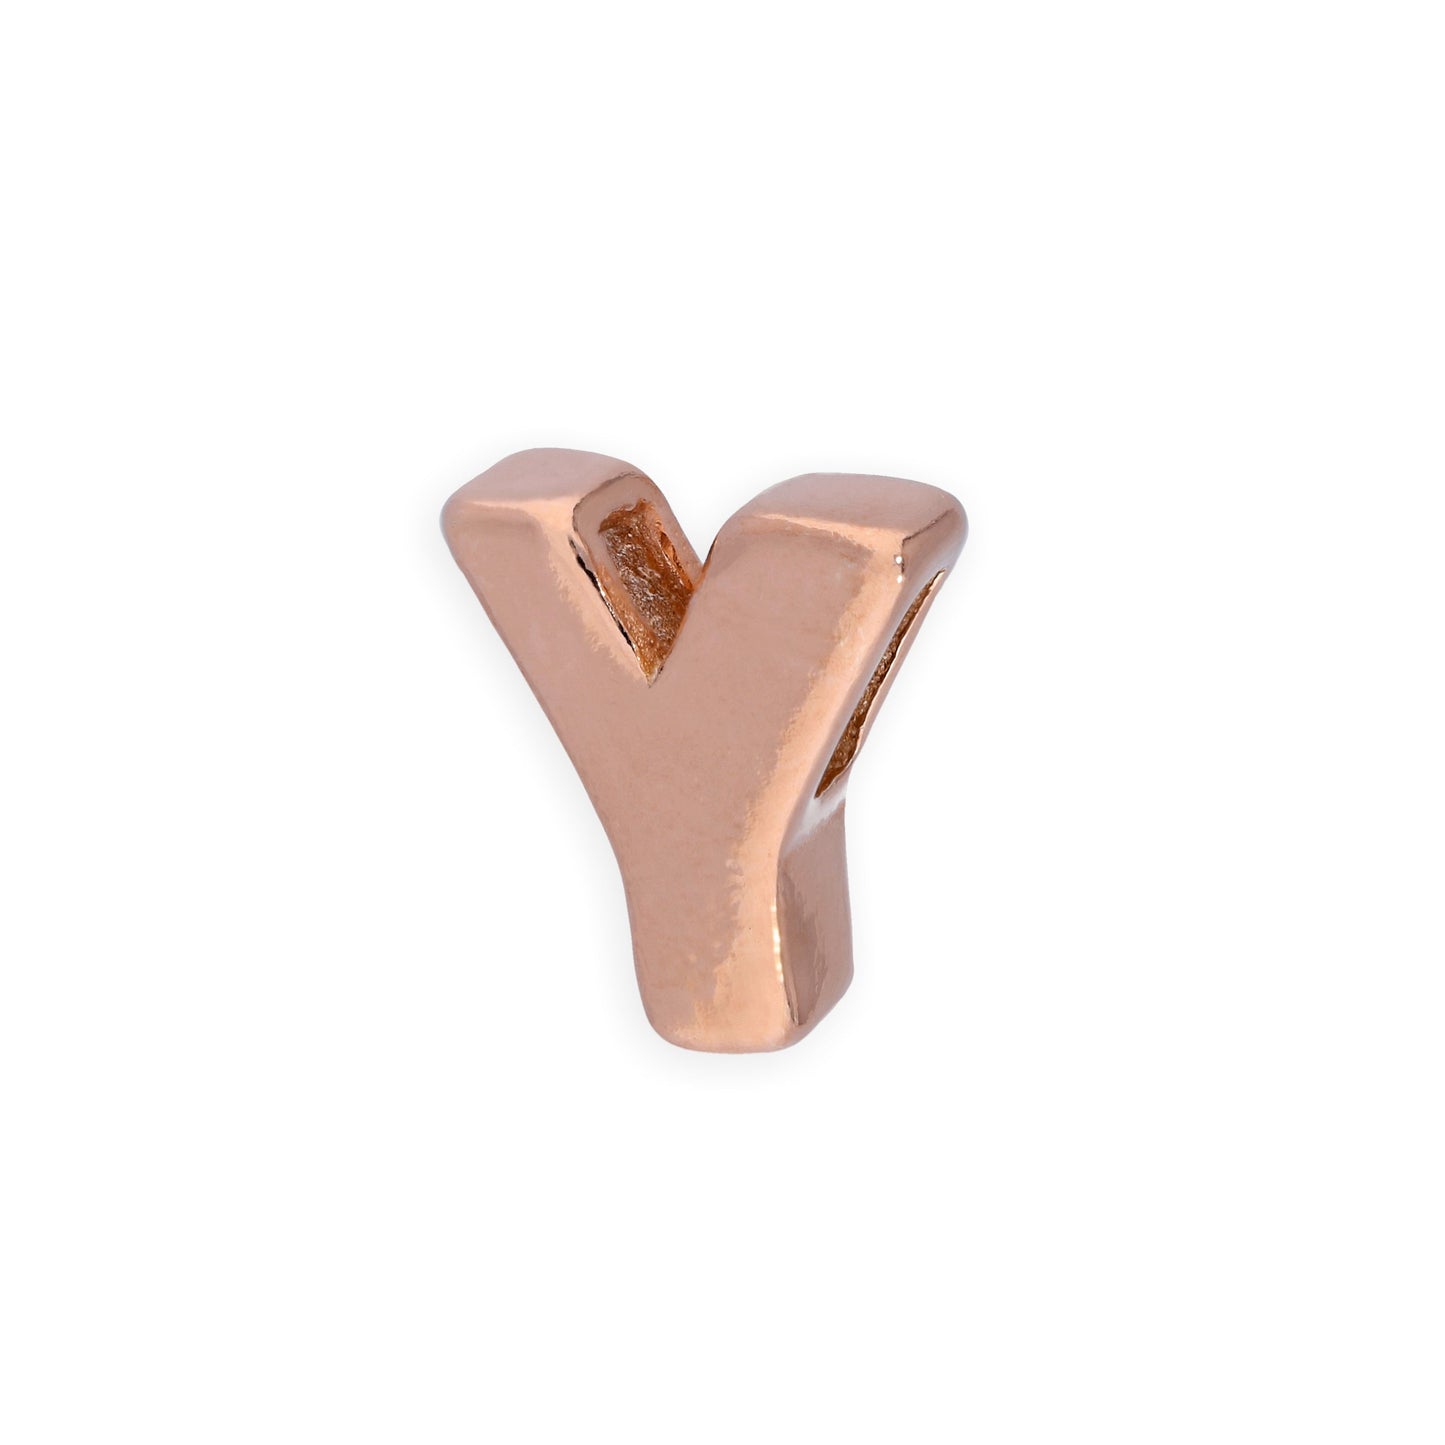 Rose Gold Plated Sterling Silver Alphabet Letter Threader Bead Charm A - Z